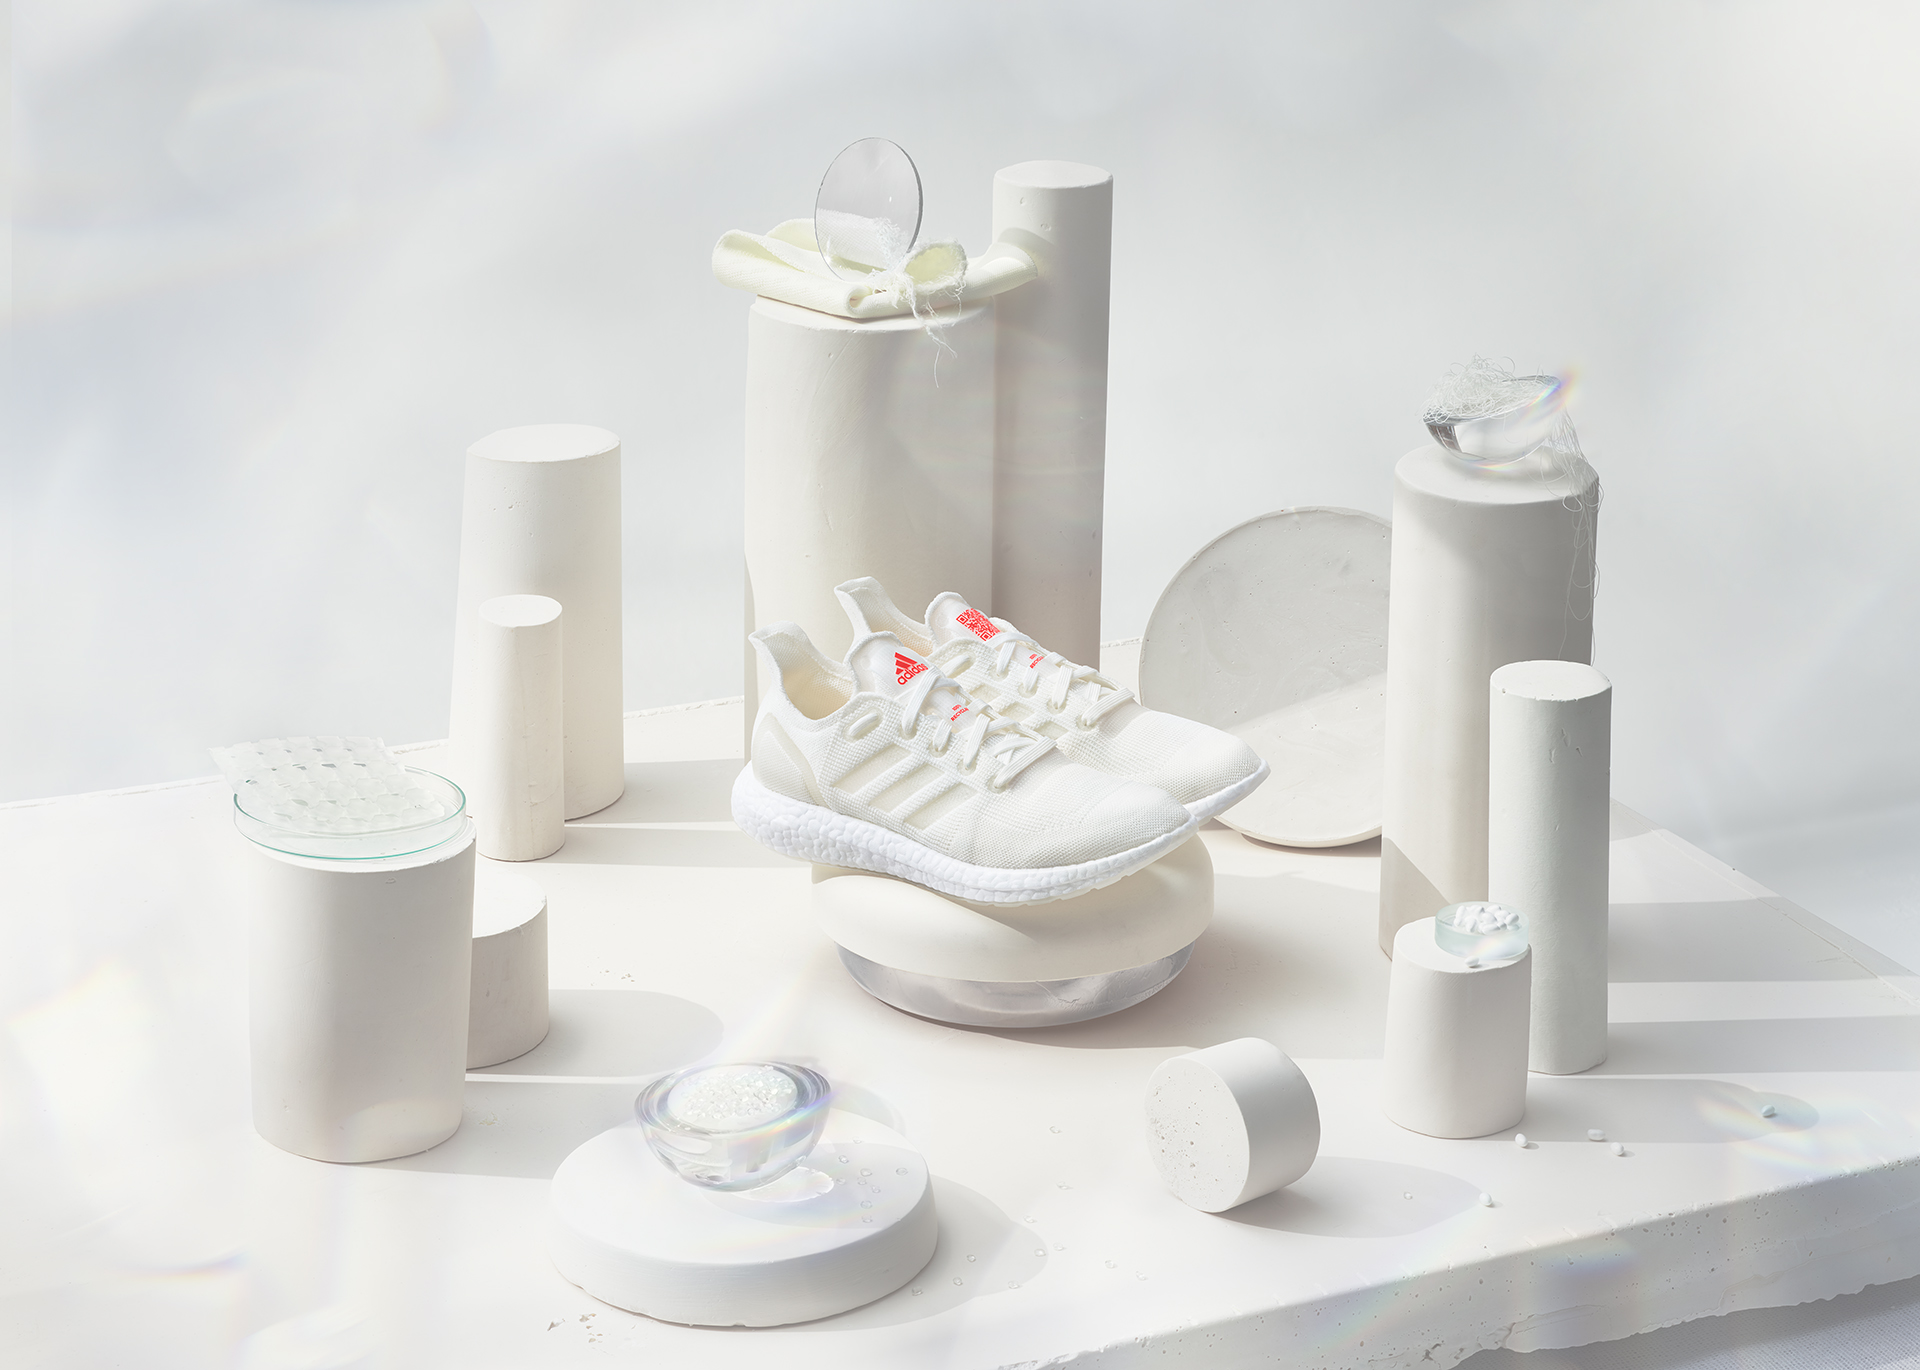 White adidas shoes design and plastic crisis